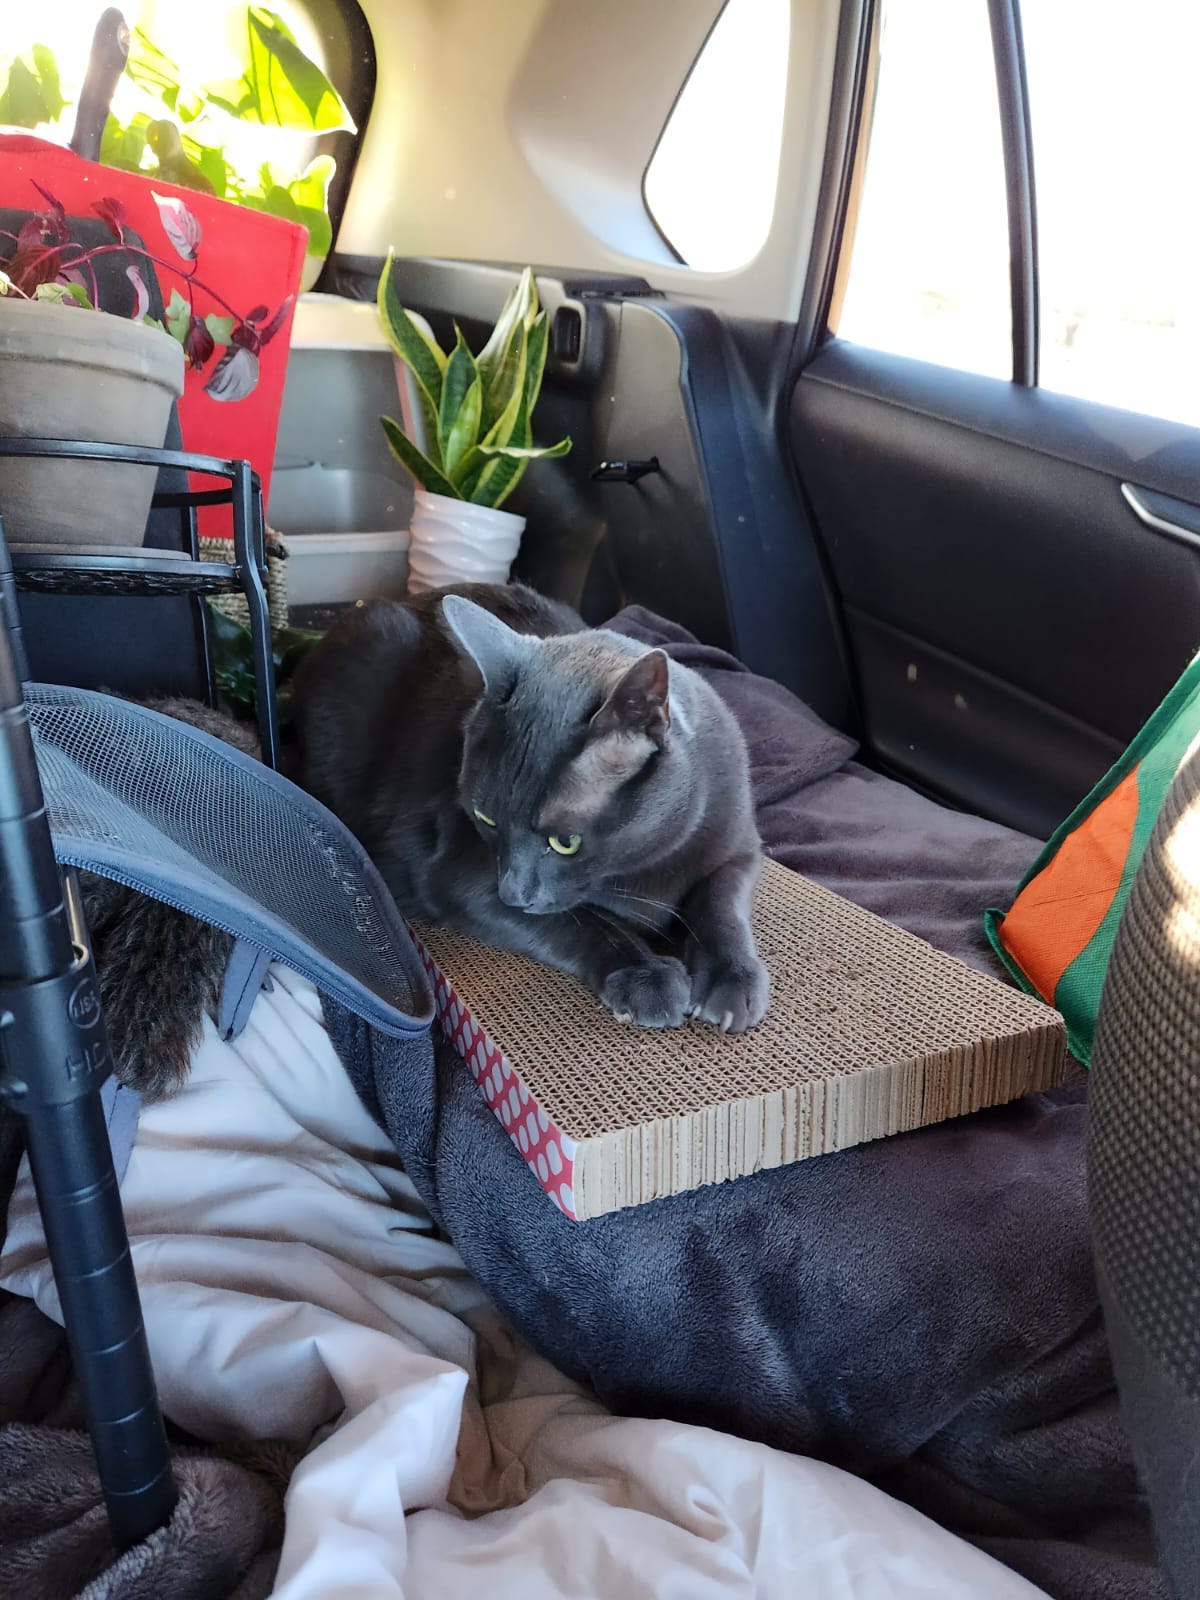 the best grey cat in the world, Pixel, laying on a cardboard scratch pad in the bed of a Toyota Rav4, surrounded by blankets, plants, his litter box, a cat carrier, and a variety of climbing levels for him. Taken from the front passenger seat.